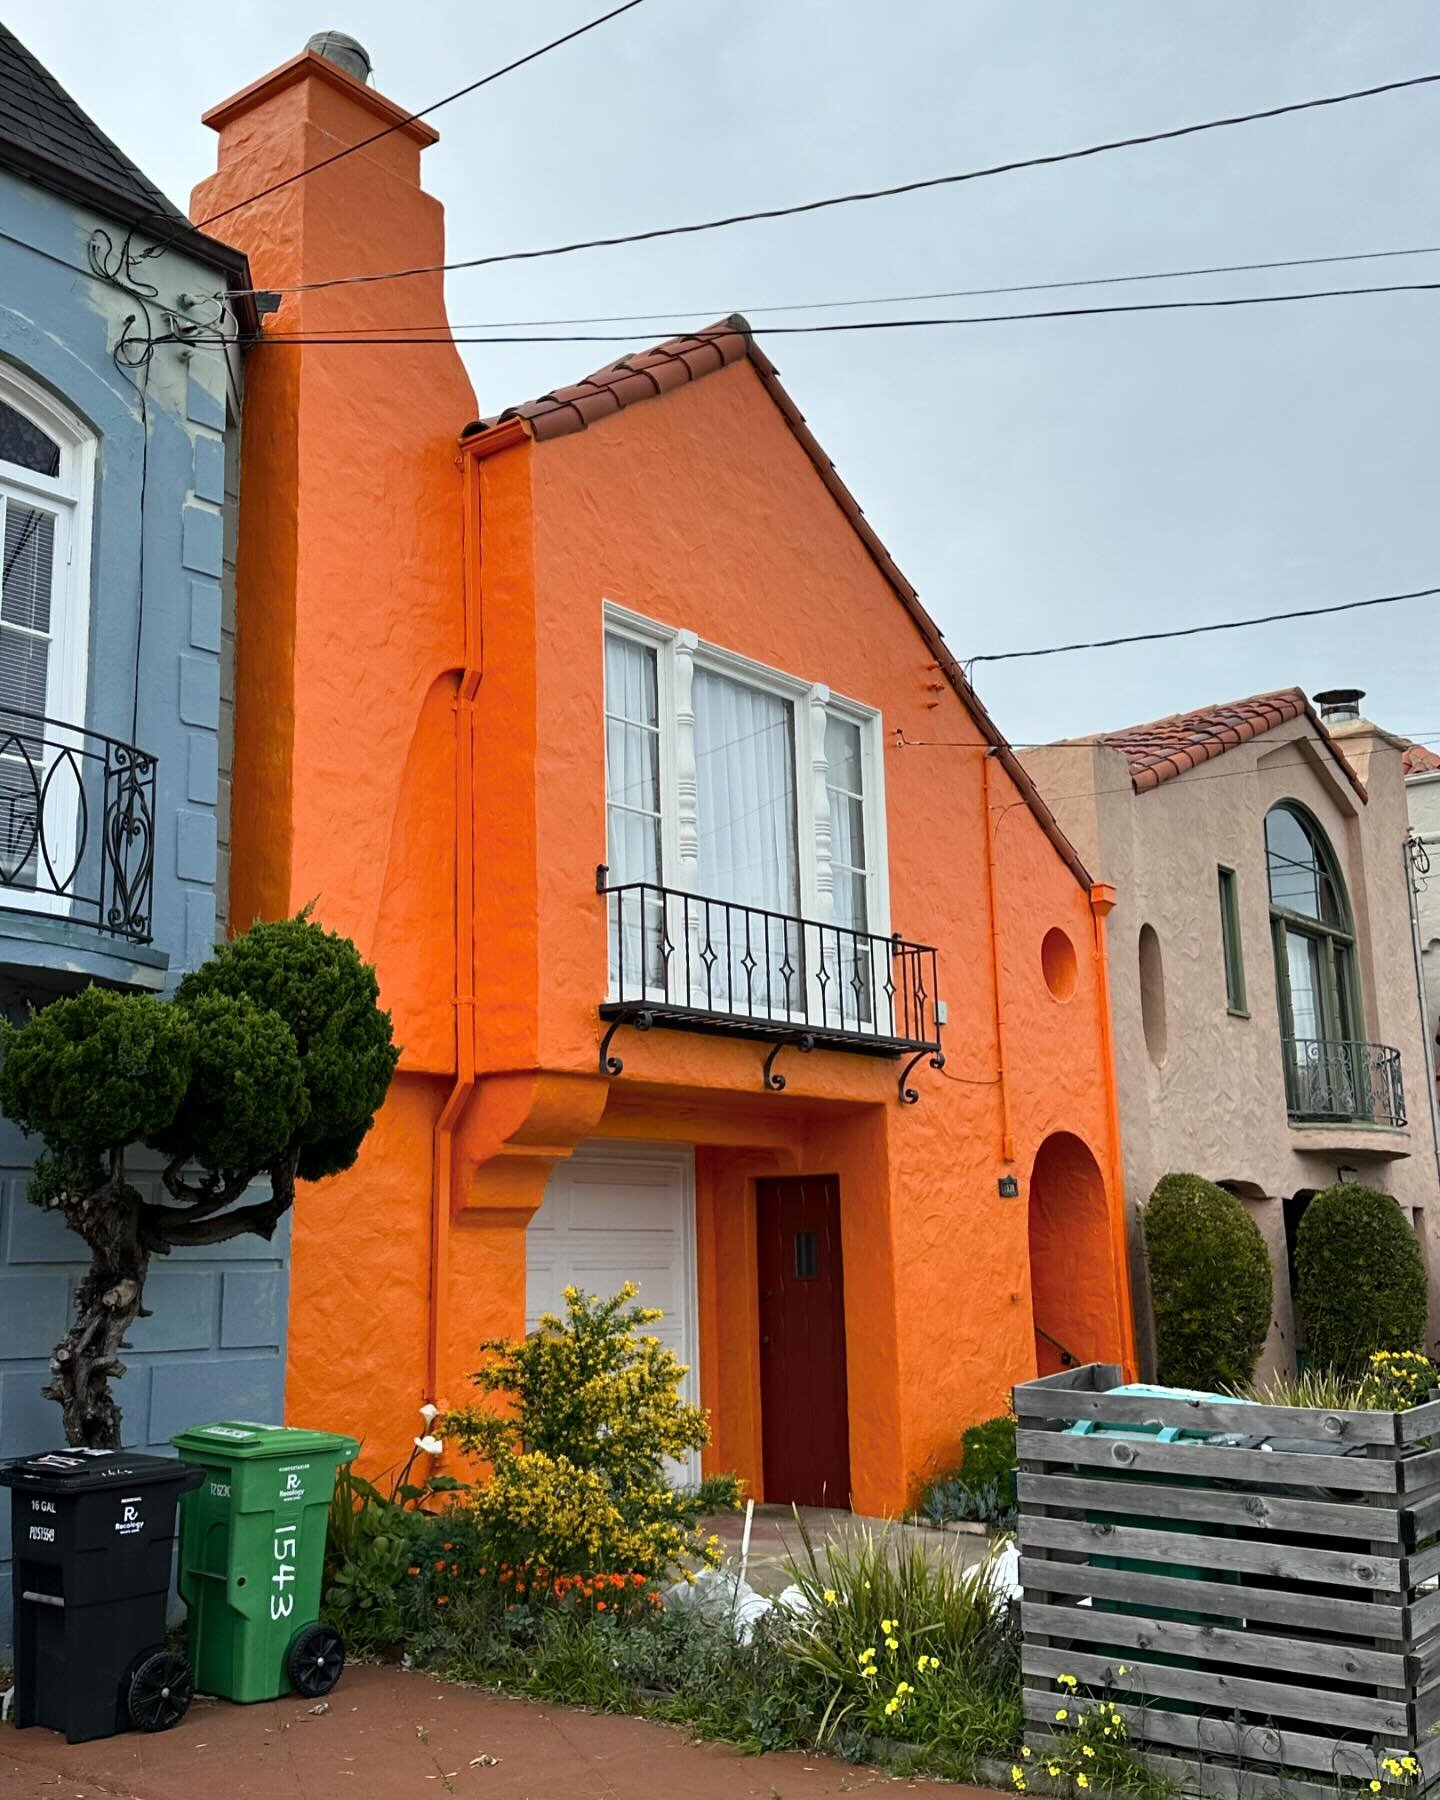 It was a colorful Sunday! 

#sfrealestate #sunset #colorfulsf #sanfranciscorealestate #sfrealtor #sanfranciscorealtor #cityrealestate #sfhomes #lovewhereyoulive #sanfrancisco